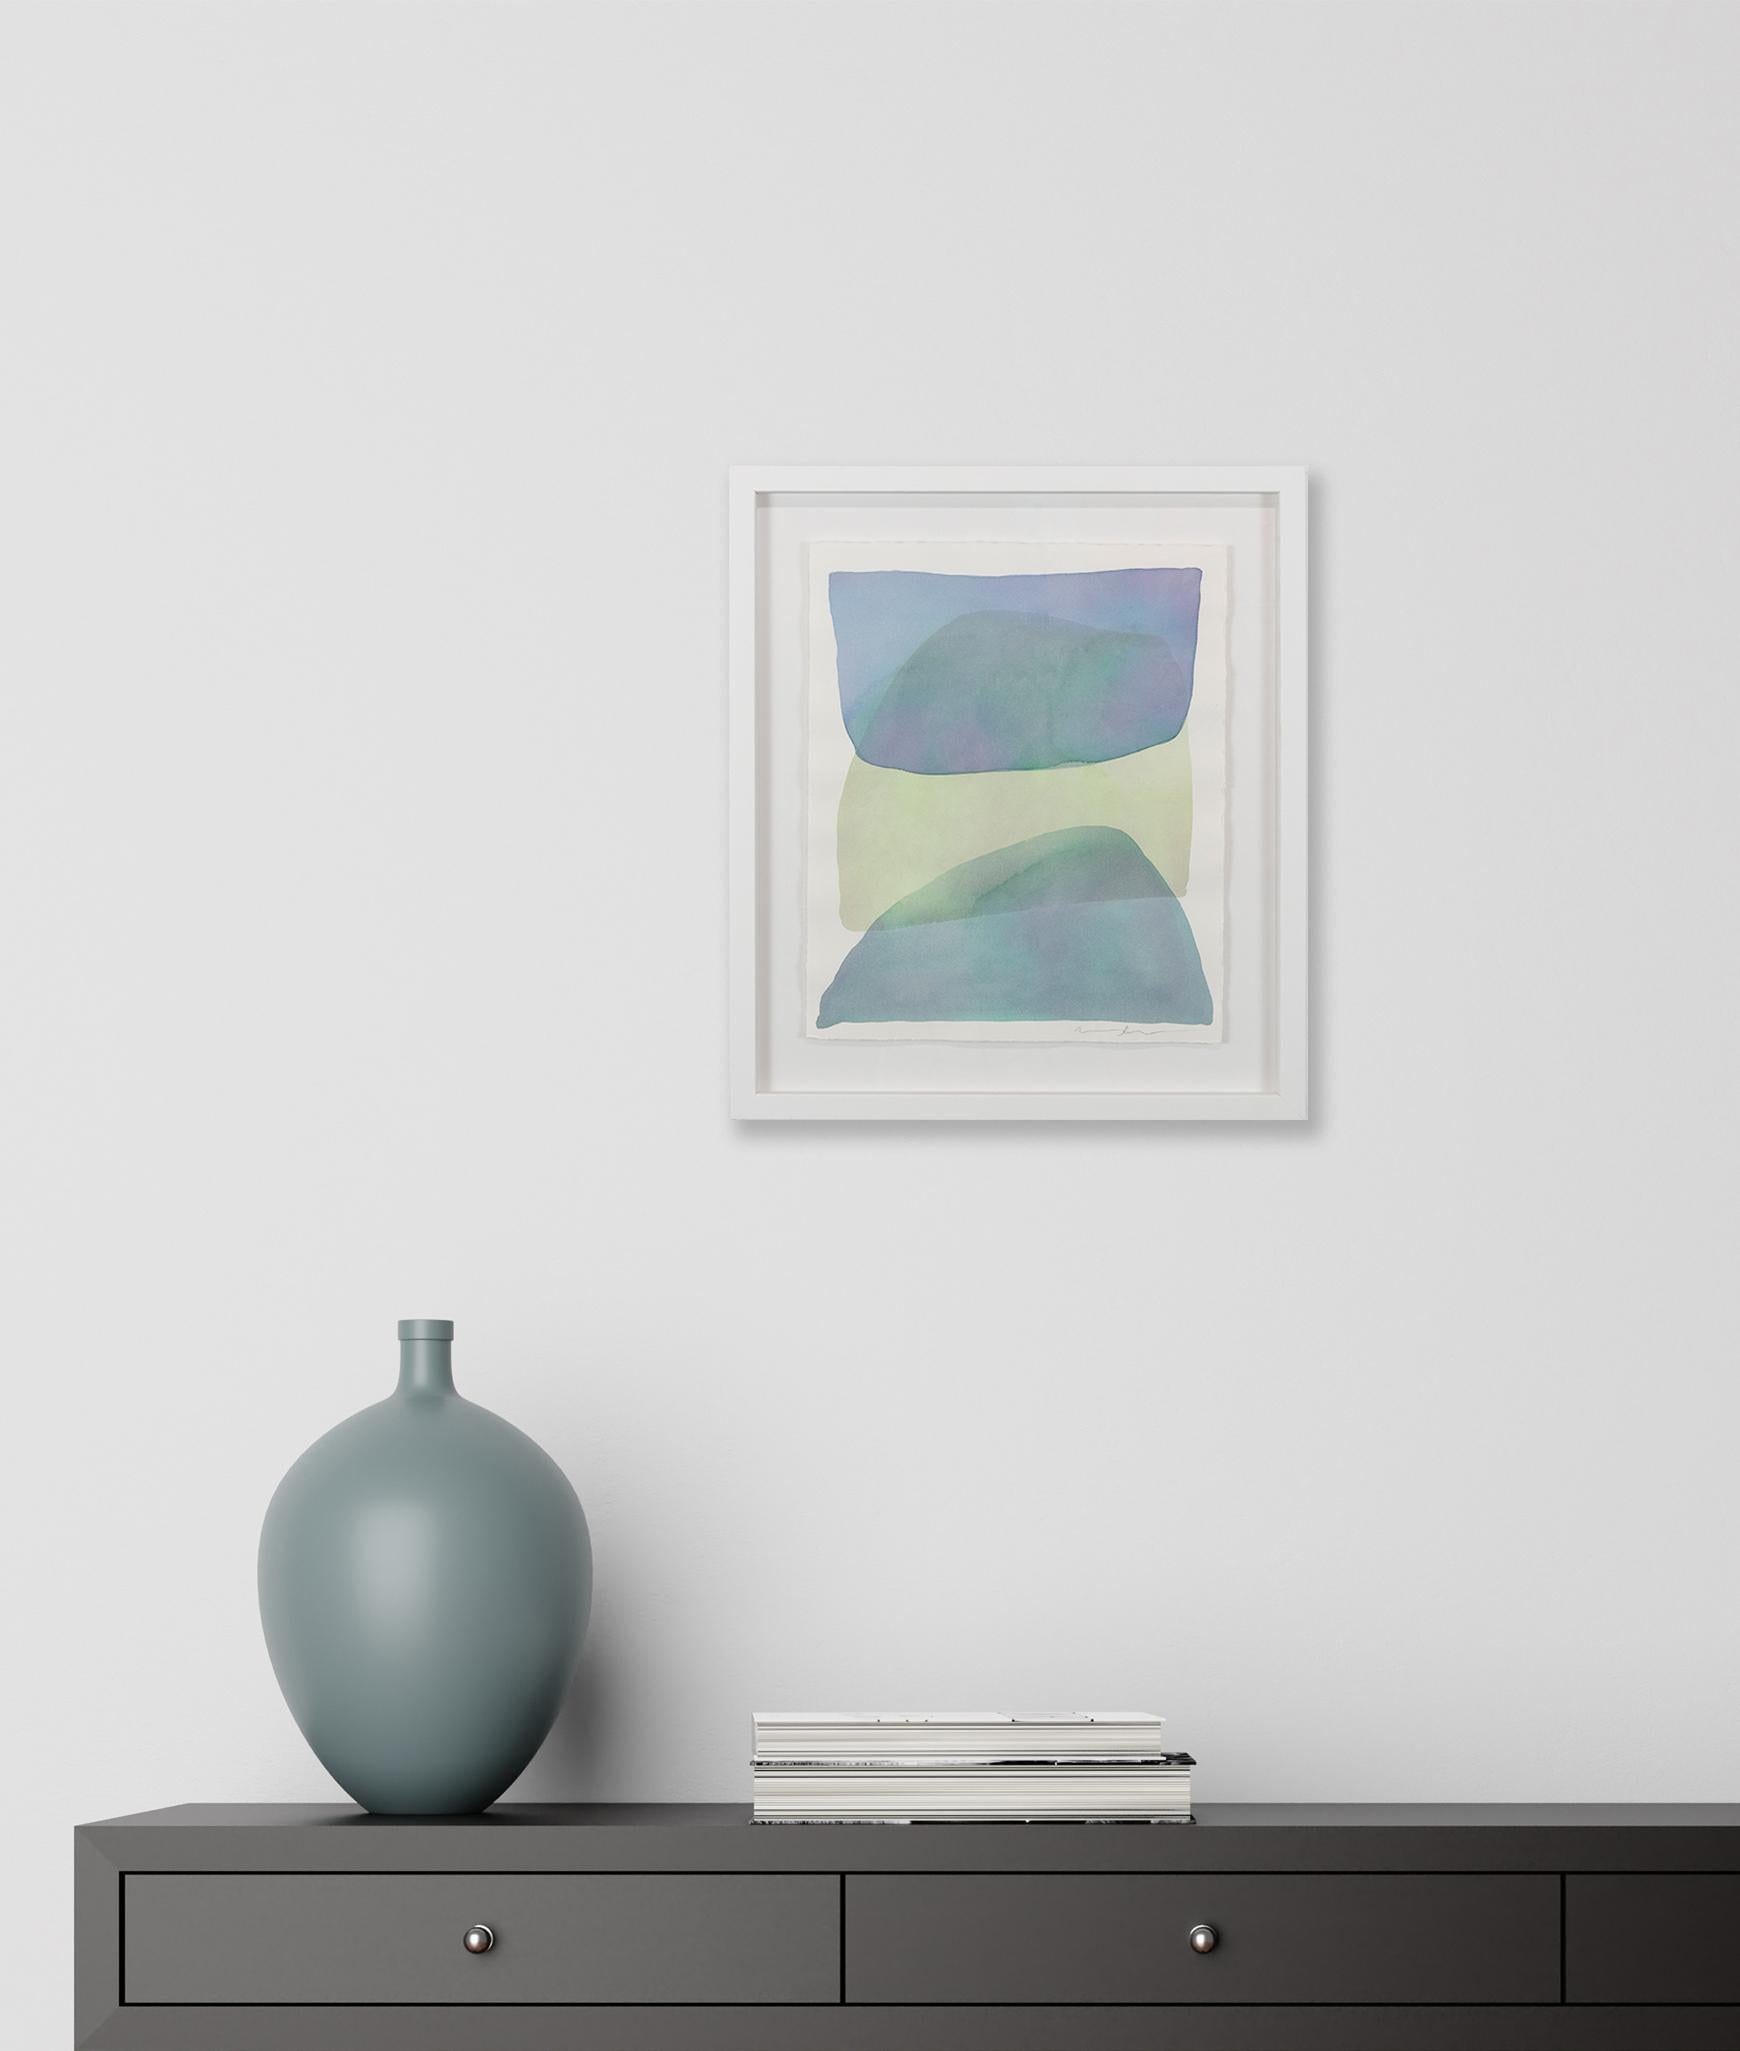 This original abstract watercolor painting by Nealy Hauschildt features a deep blue, green, and muted yellow palette, with organic planes of washy color applied in layers to create a stacked, organic, and abstract composition. The painting on paper